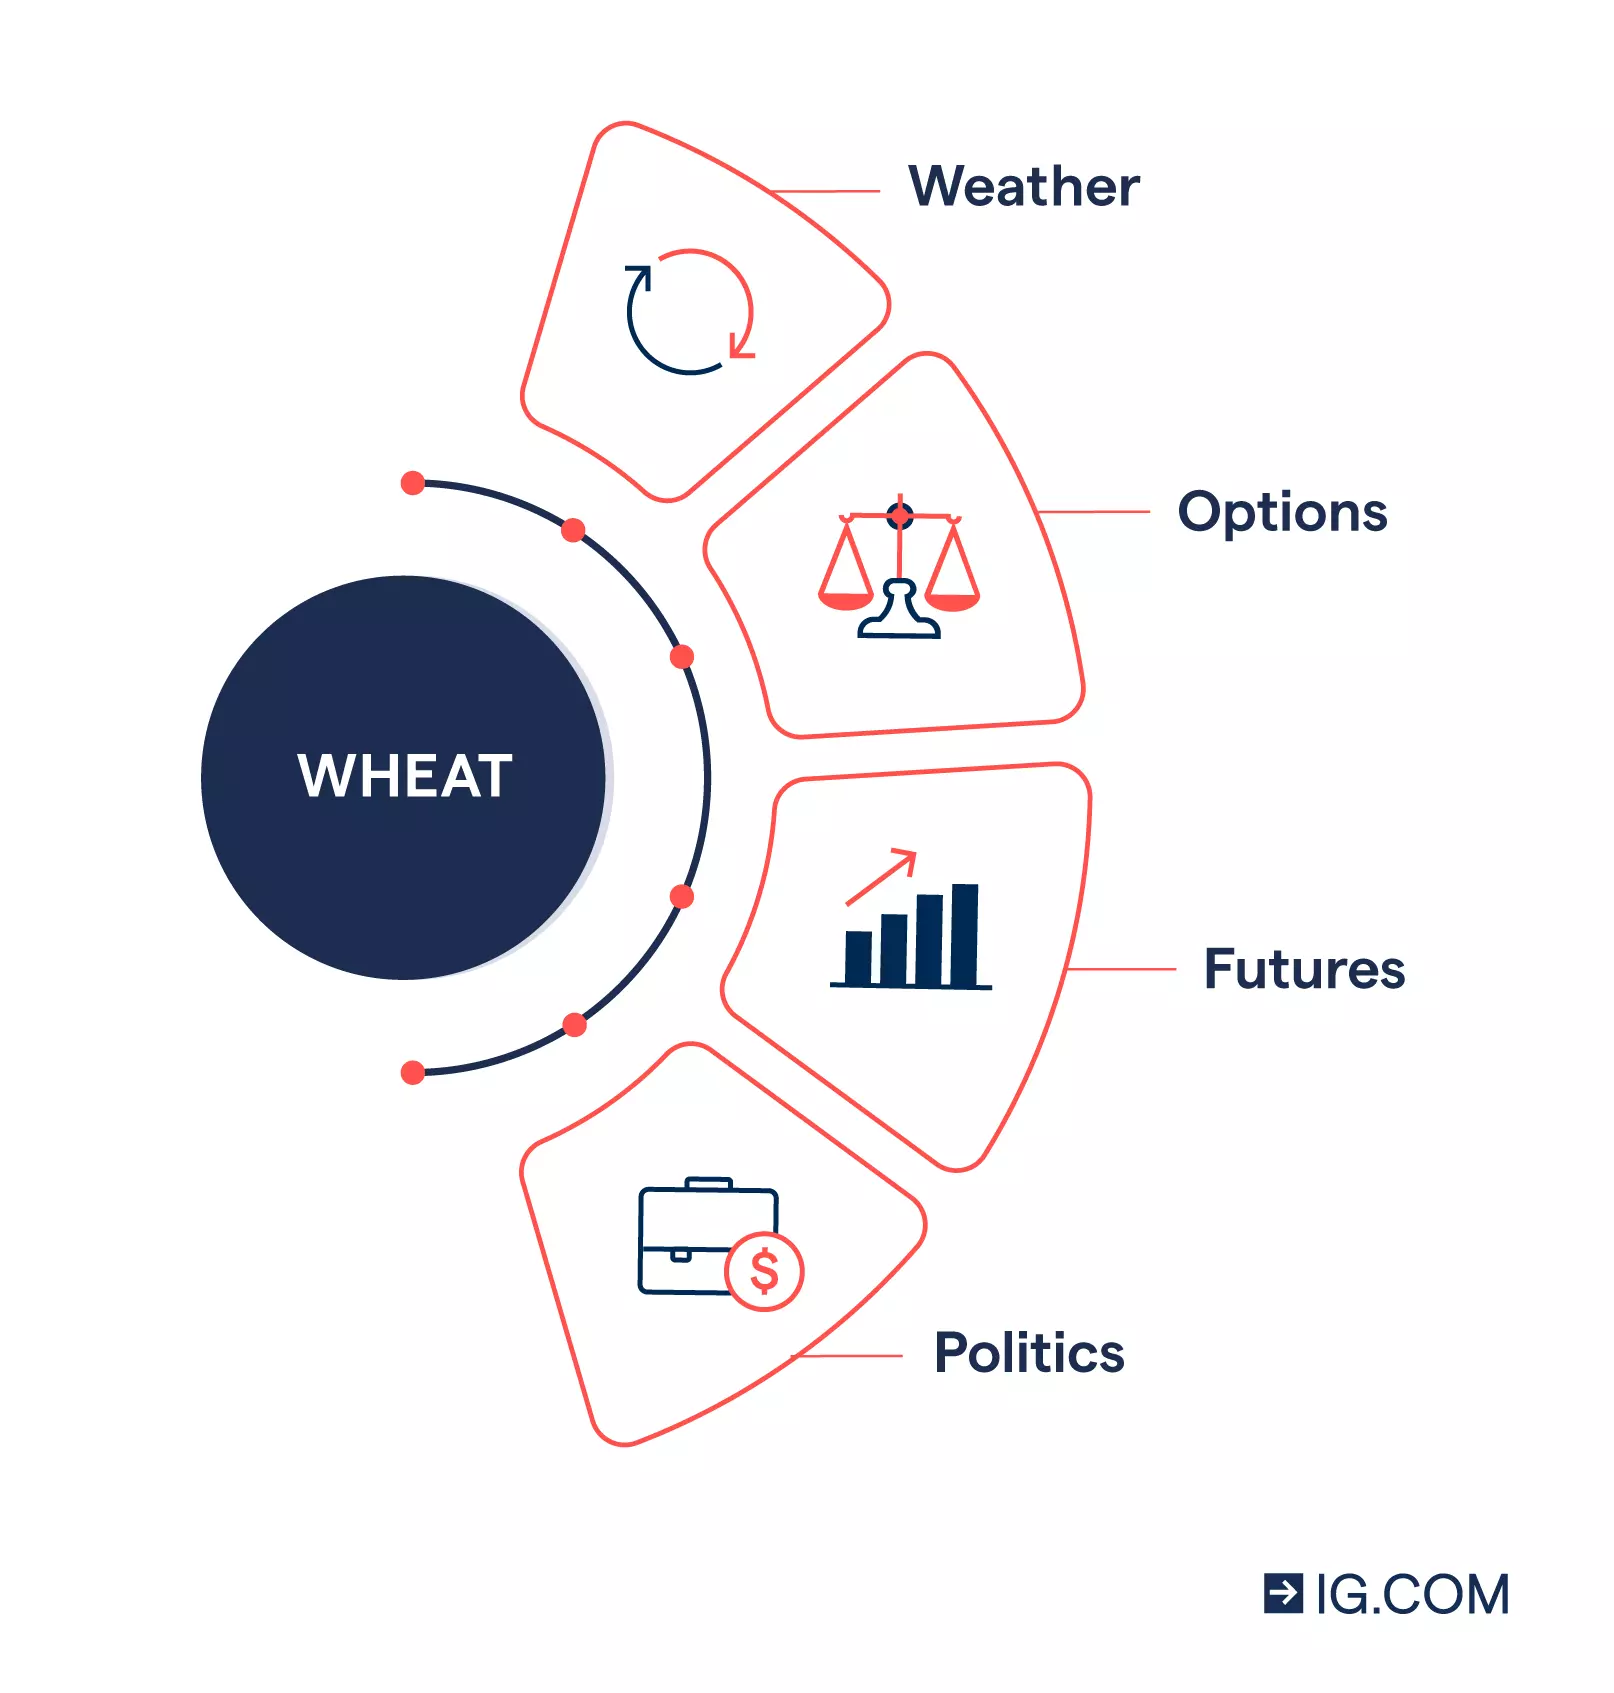 Image showing the different ways to trade wheat and the external factors that impact the wheat industry.